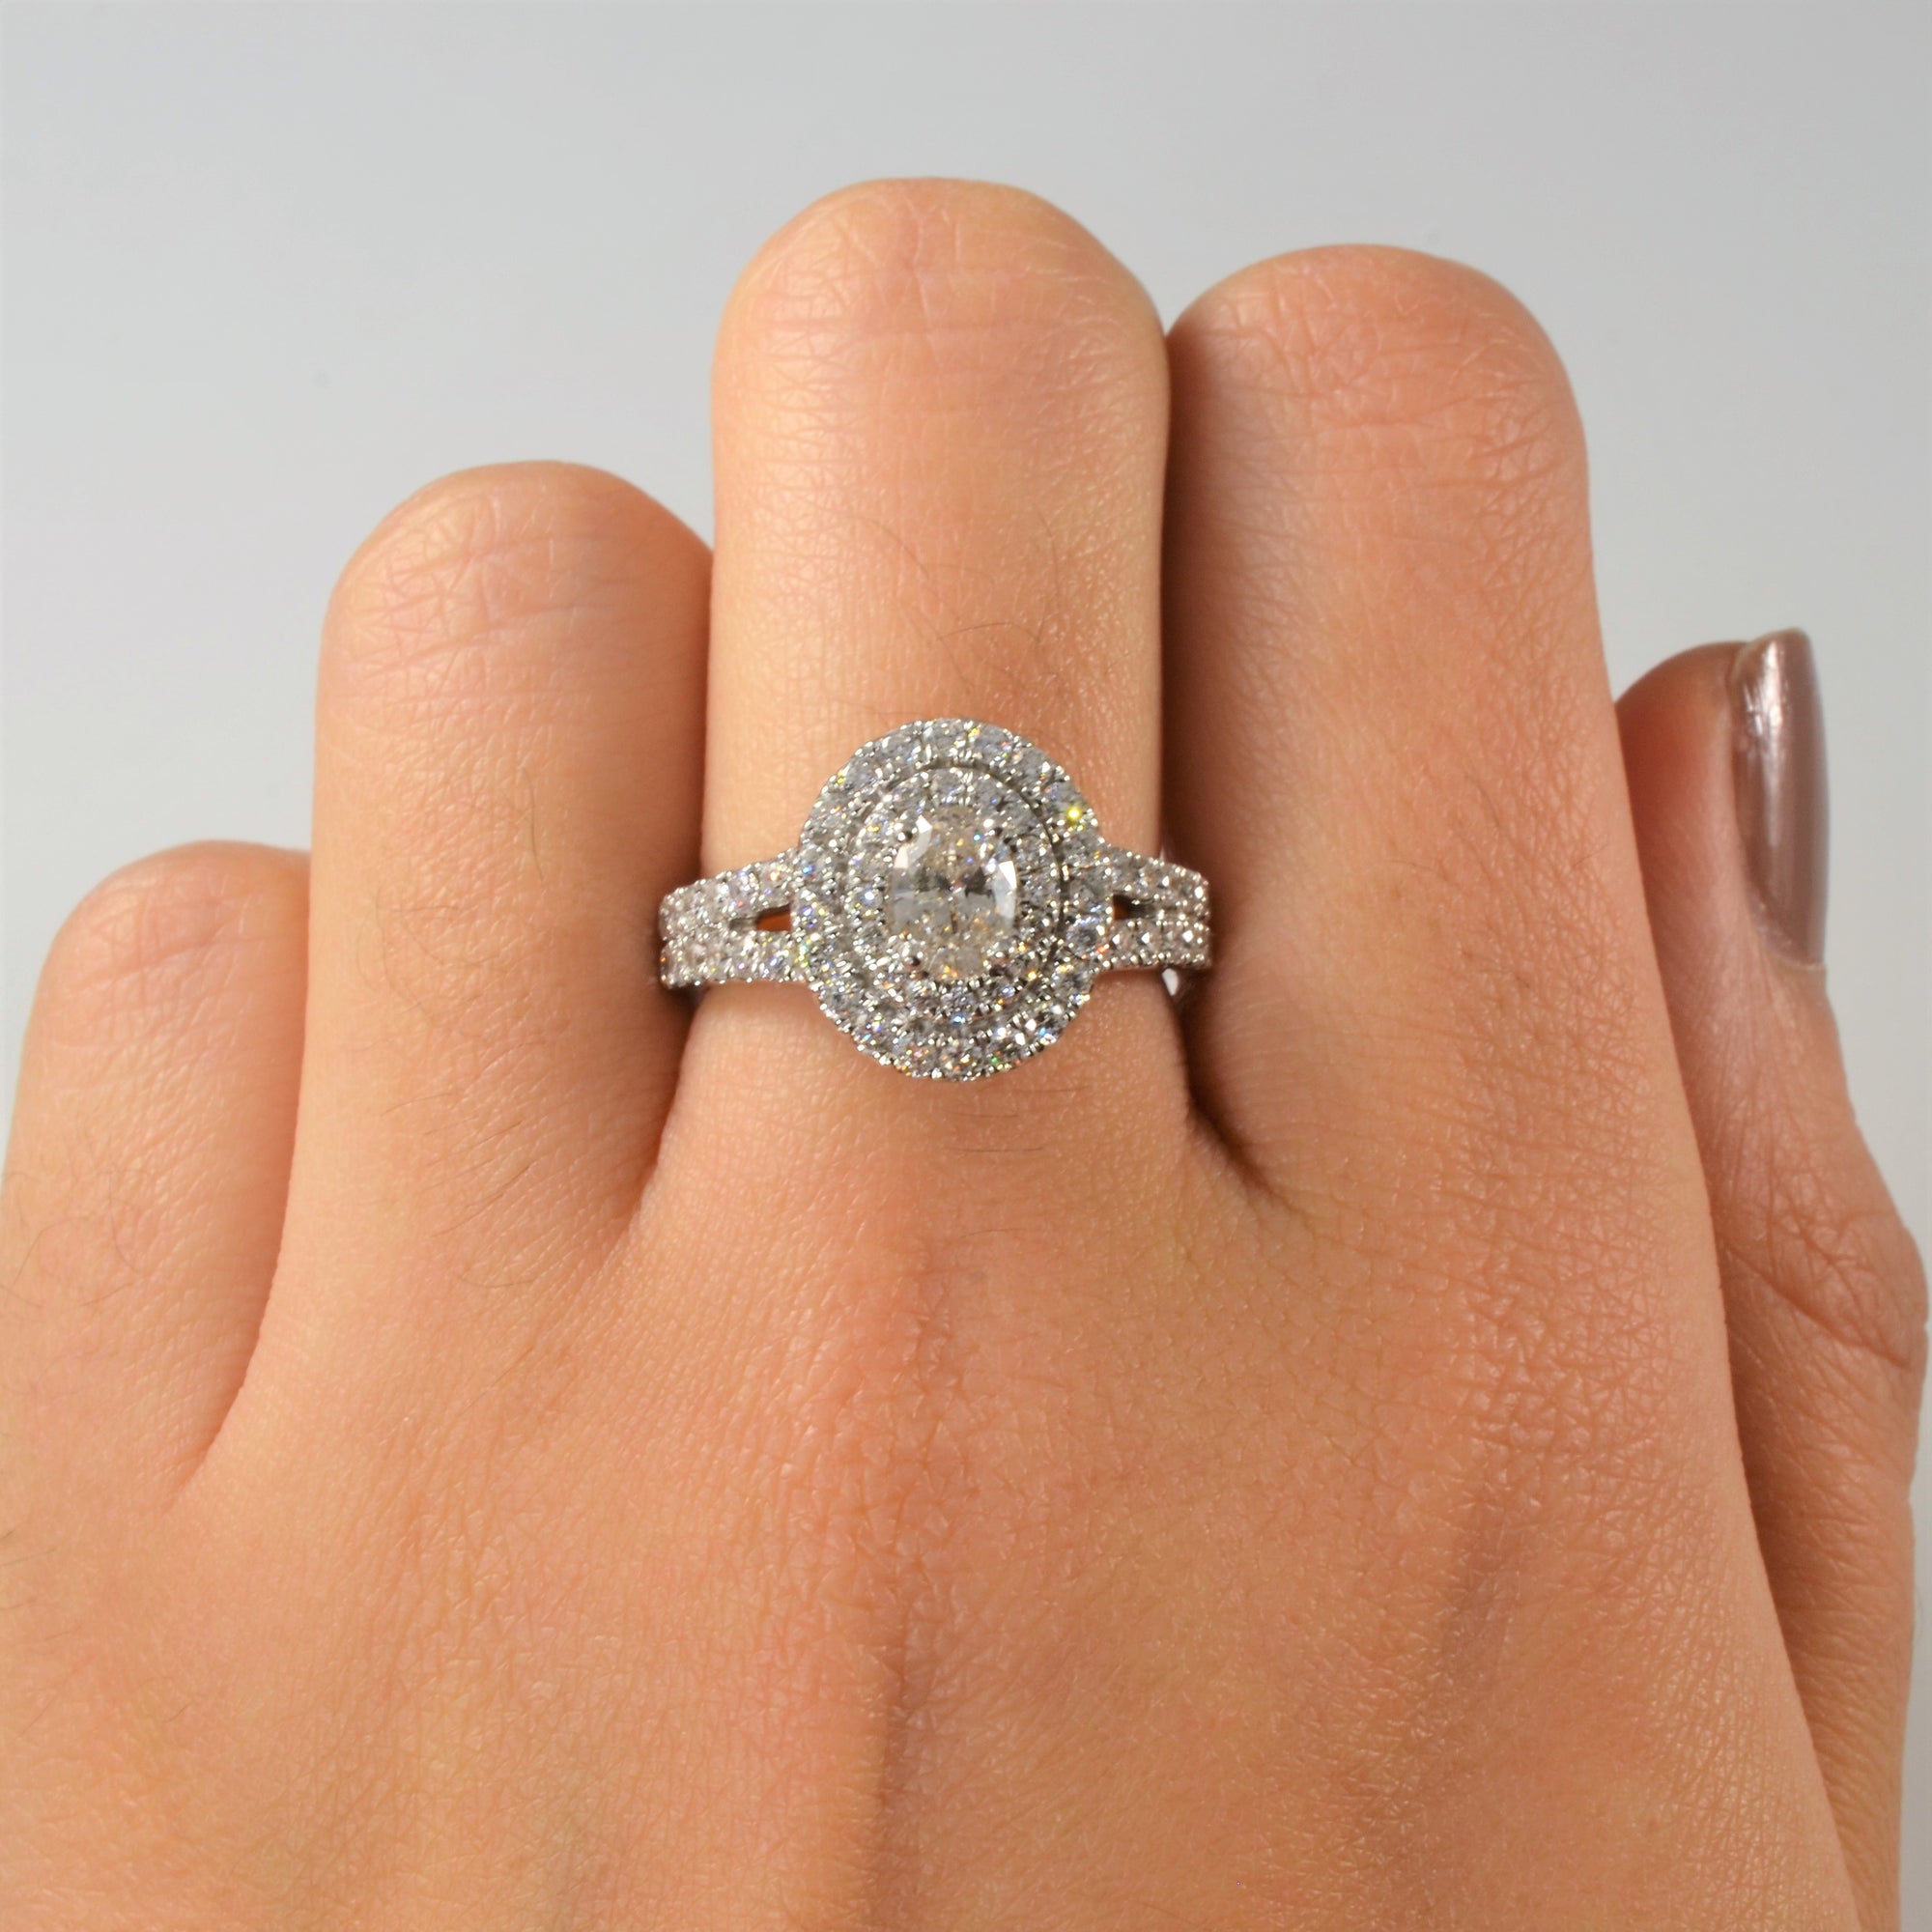 Vera Wang' Double Halo Oval Engagement Ring | 1.18ctw | SZ 6.5 |